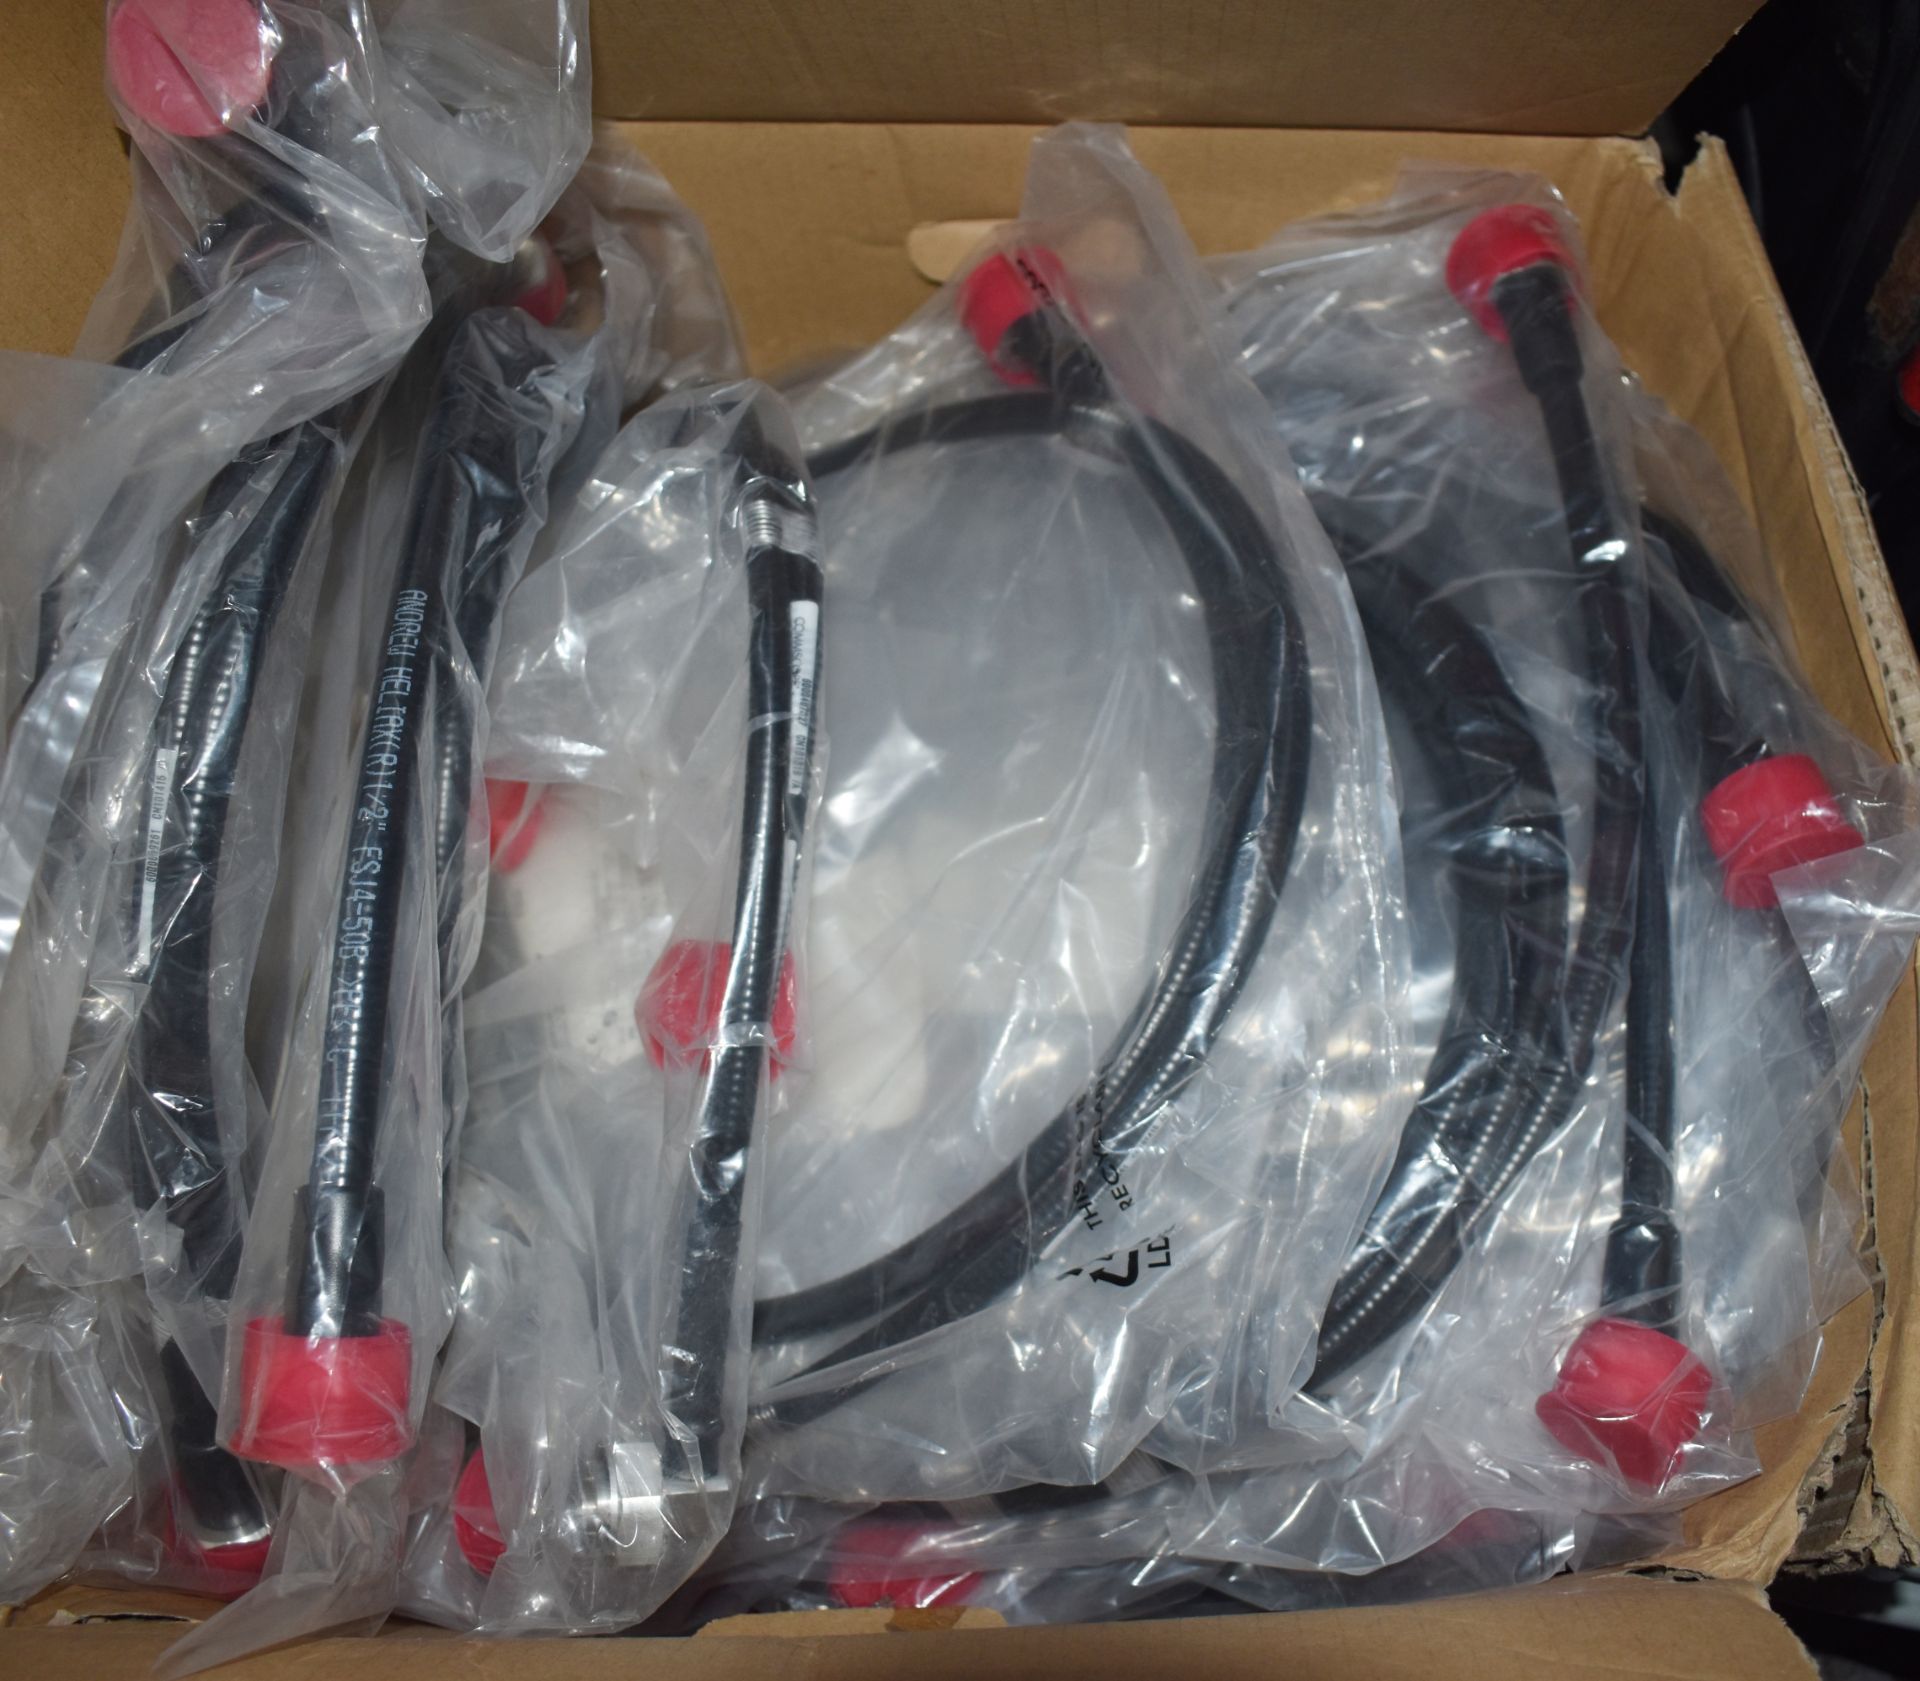 22 x Commscope Heliax Superflexible SureFlex Jumper Cables With Interfaces - Brand New - Type F4A- - Image 4 of 5